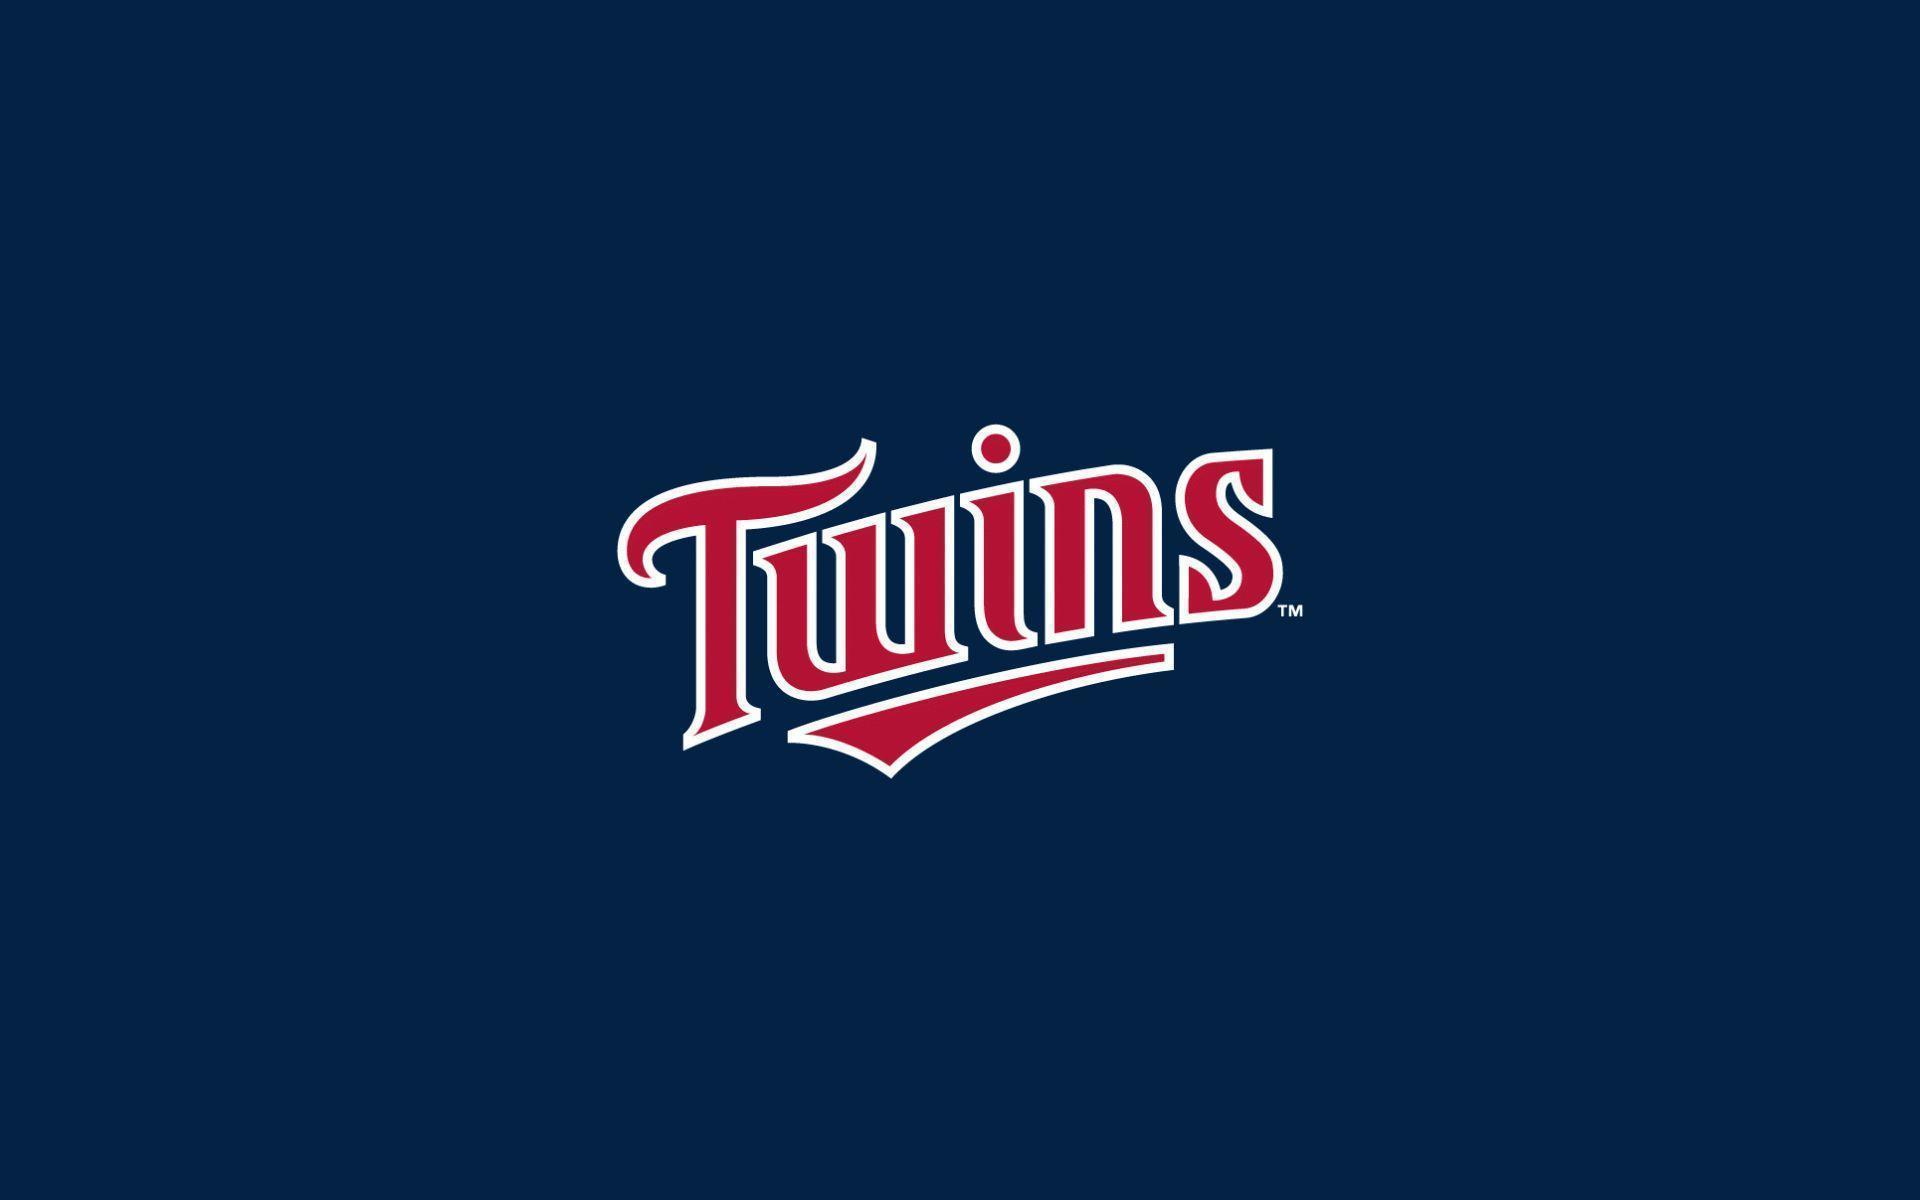 OC] Twins April 2023 Schedule iPhone Wallpapers : r/minnesotatwins